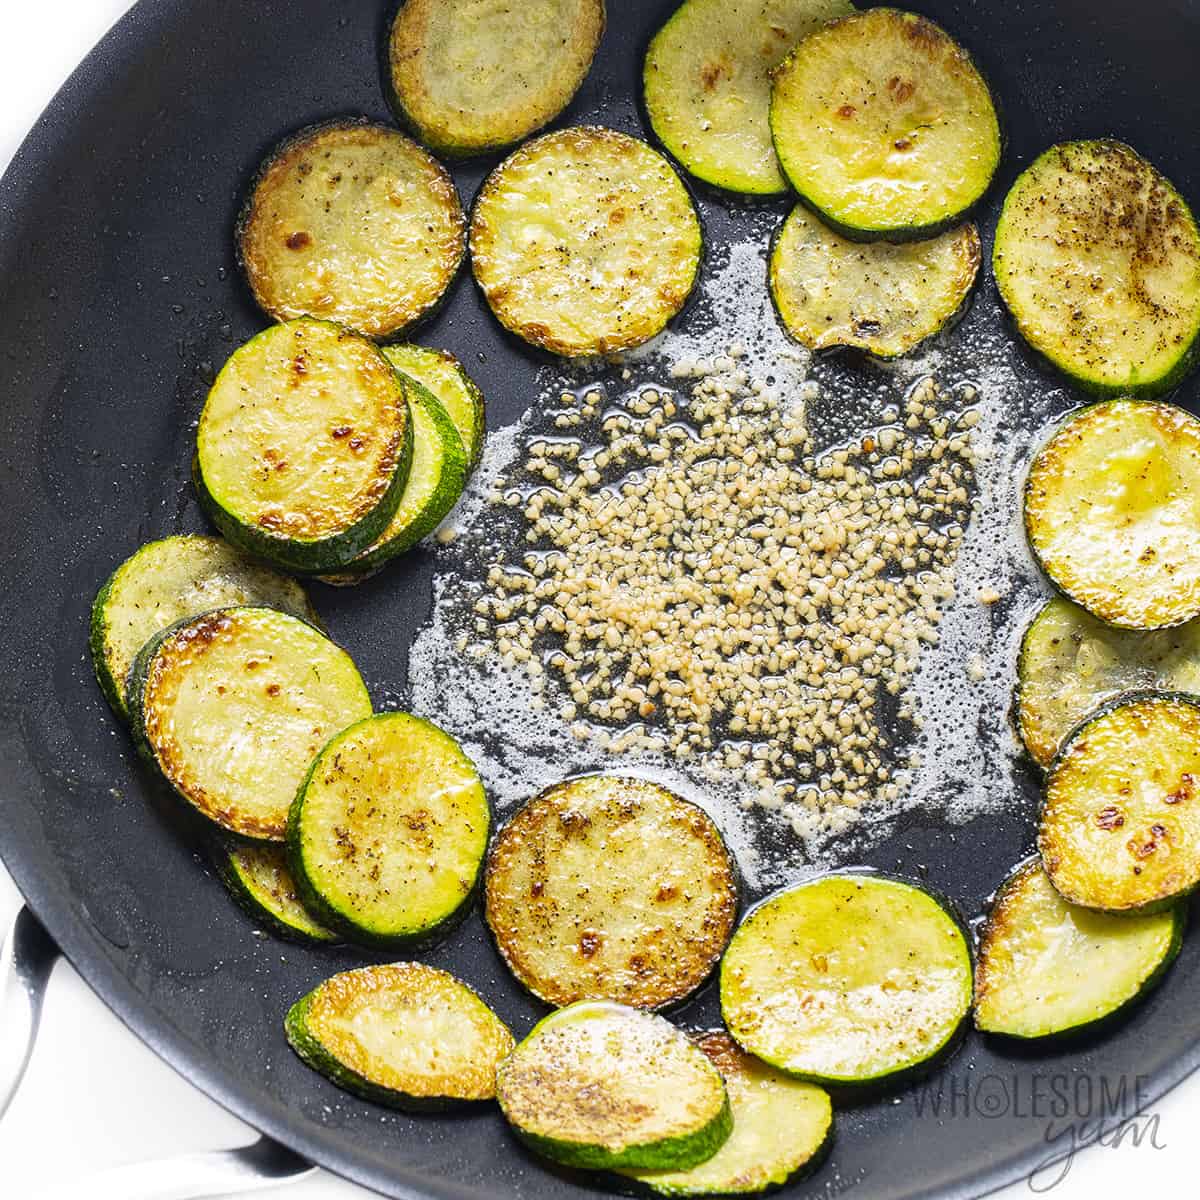 Sauteed zucchini with garlic and butter in a pan.